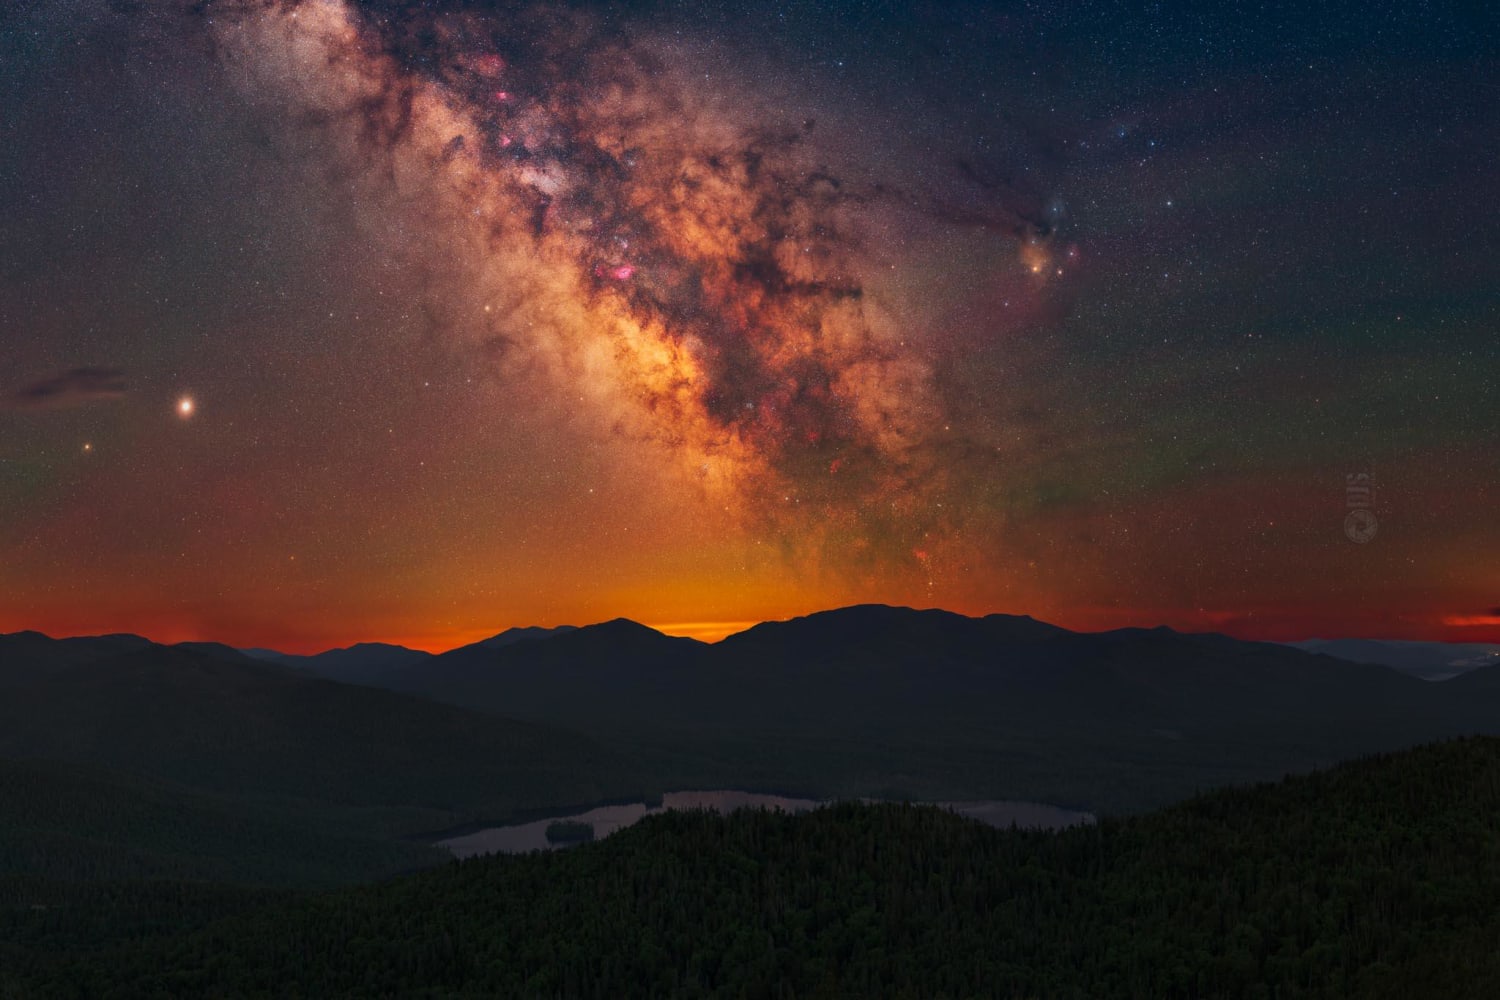 Using a star tracker, I stitched together 20 images to create this 120 MP high resolution Milky Way pano—zoom in to see the details!